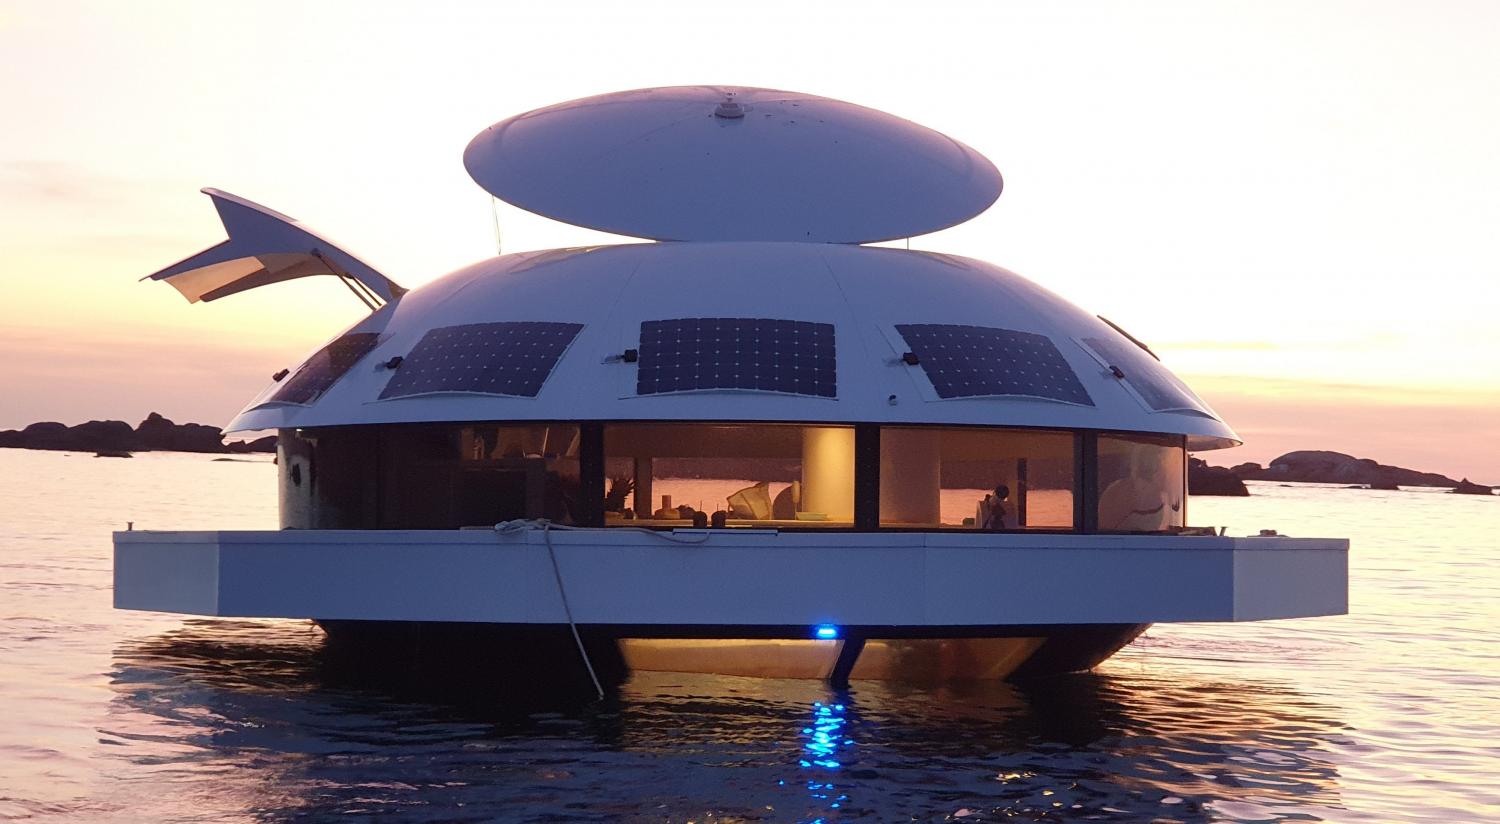 Anthenea Solar Powered Luxury Floating Hotel Suite - UFO-shaped saucer boat home